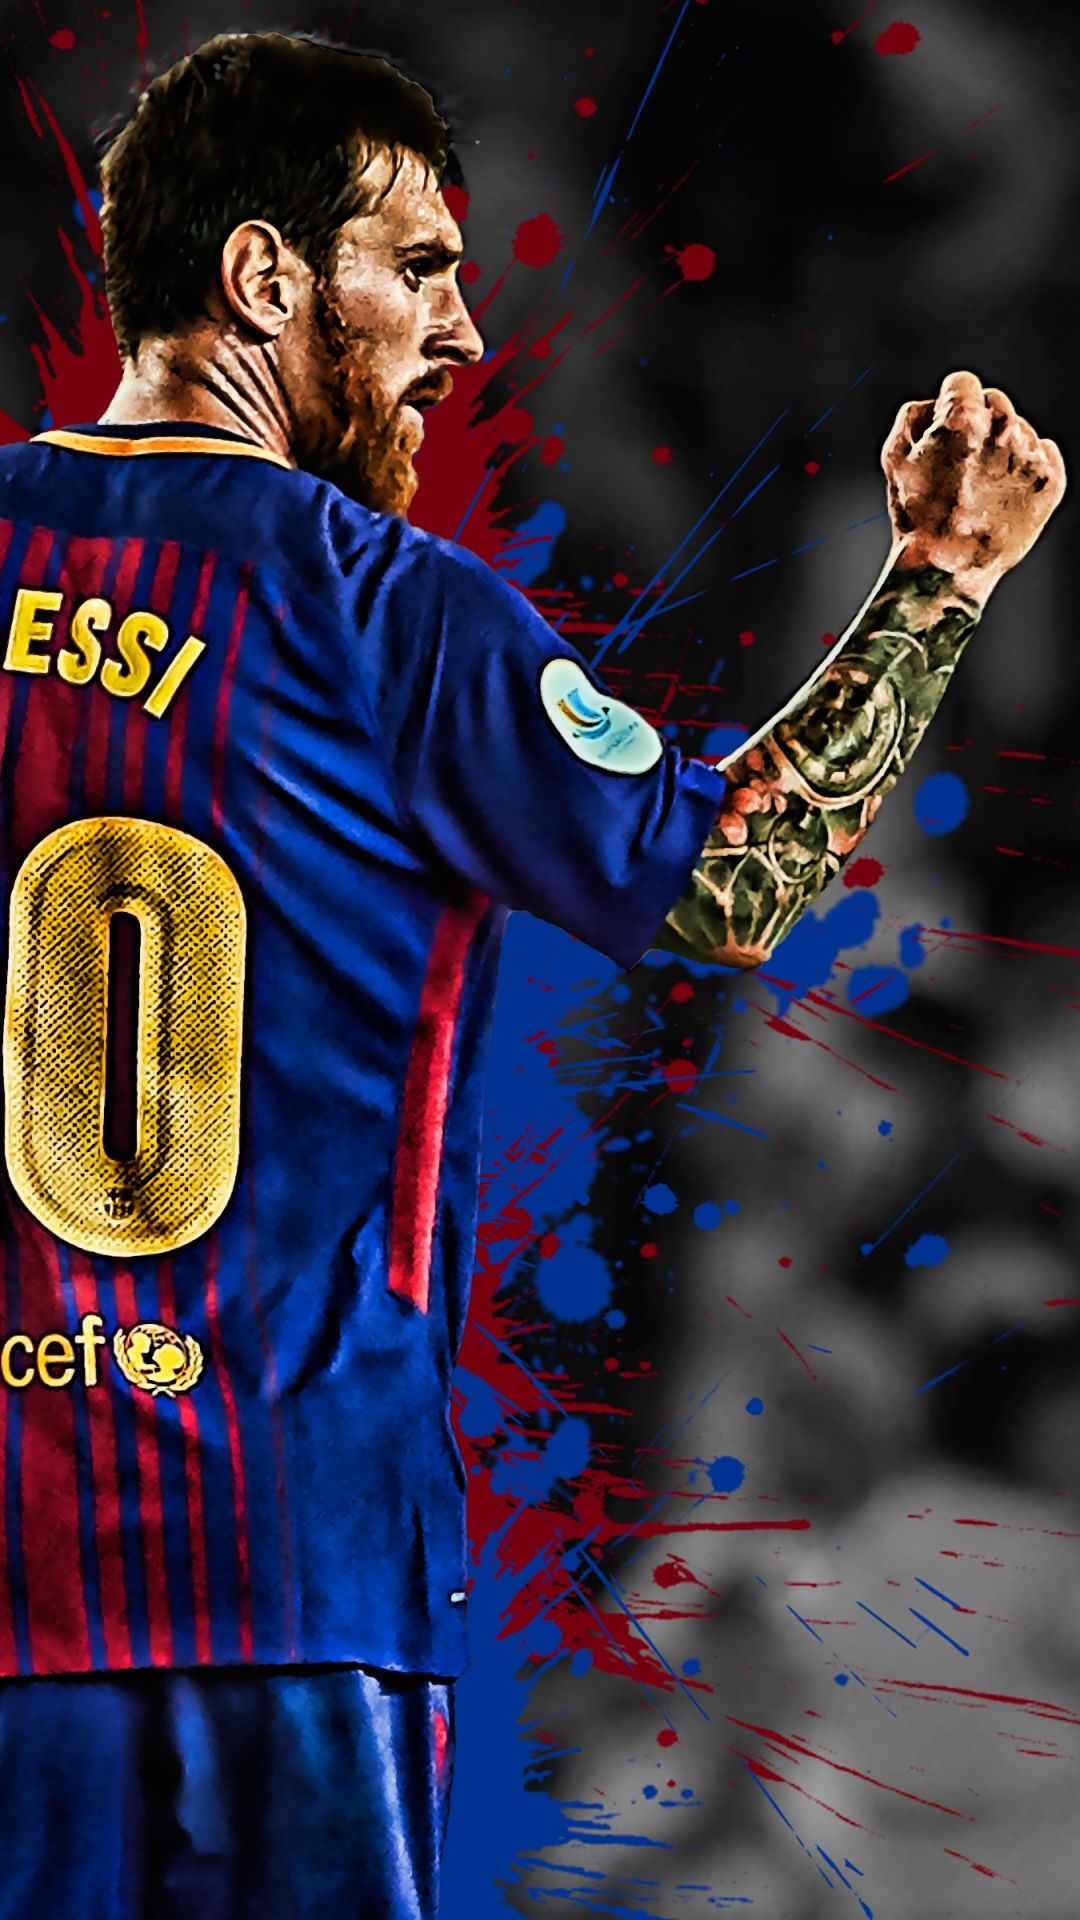 Free download Lionel Messi 4k Ultra HD Wallpaper Background Image 3840x2400 [3840x2400] for your Desktop, Mobile & Tablet. Explore Messi 2020 4k Mobile Wallpaper. Messi 2020 4k Mobile Wallpaper